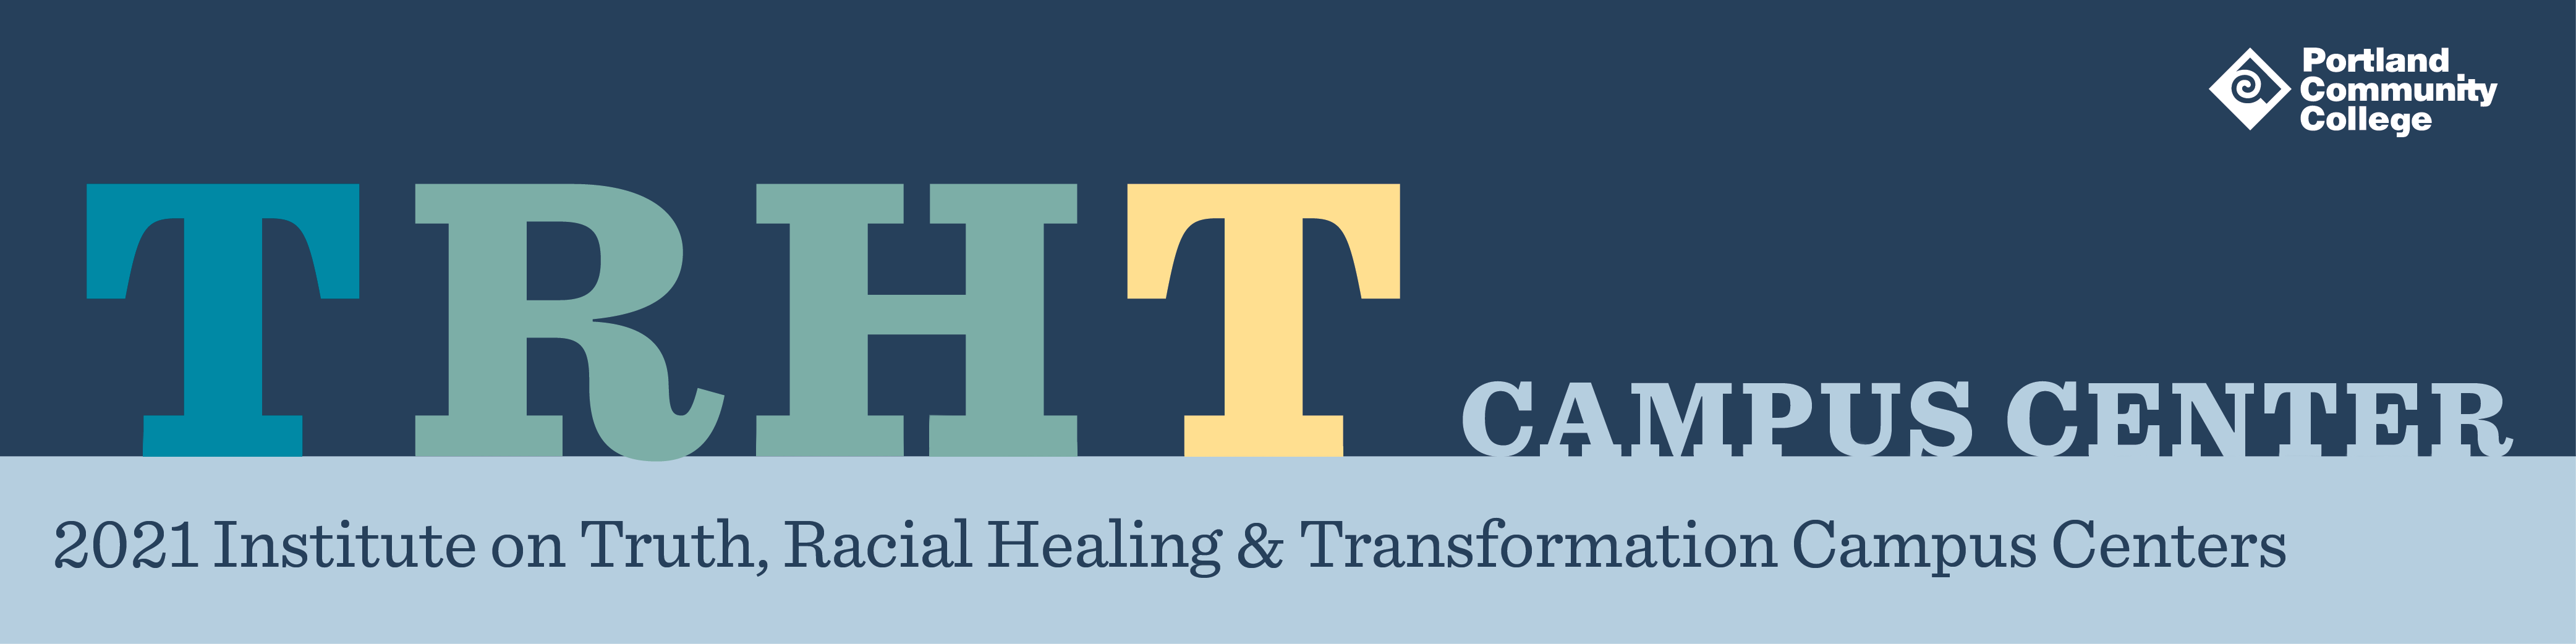 TRHT Campus Center: 2021 Institute on Truth, Racial Healing & Transformation Campus Centers